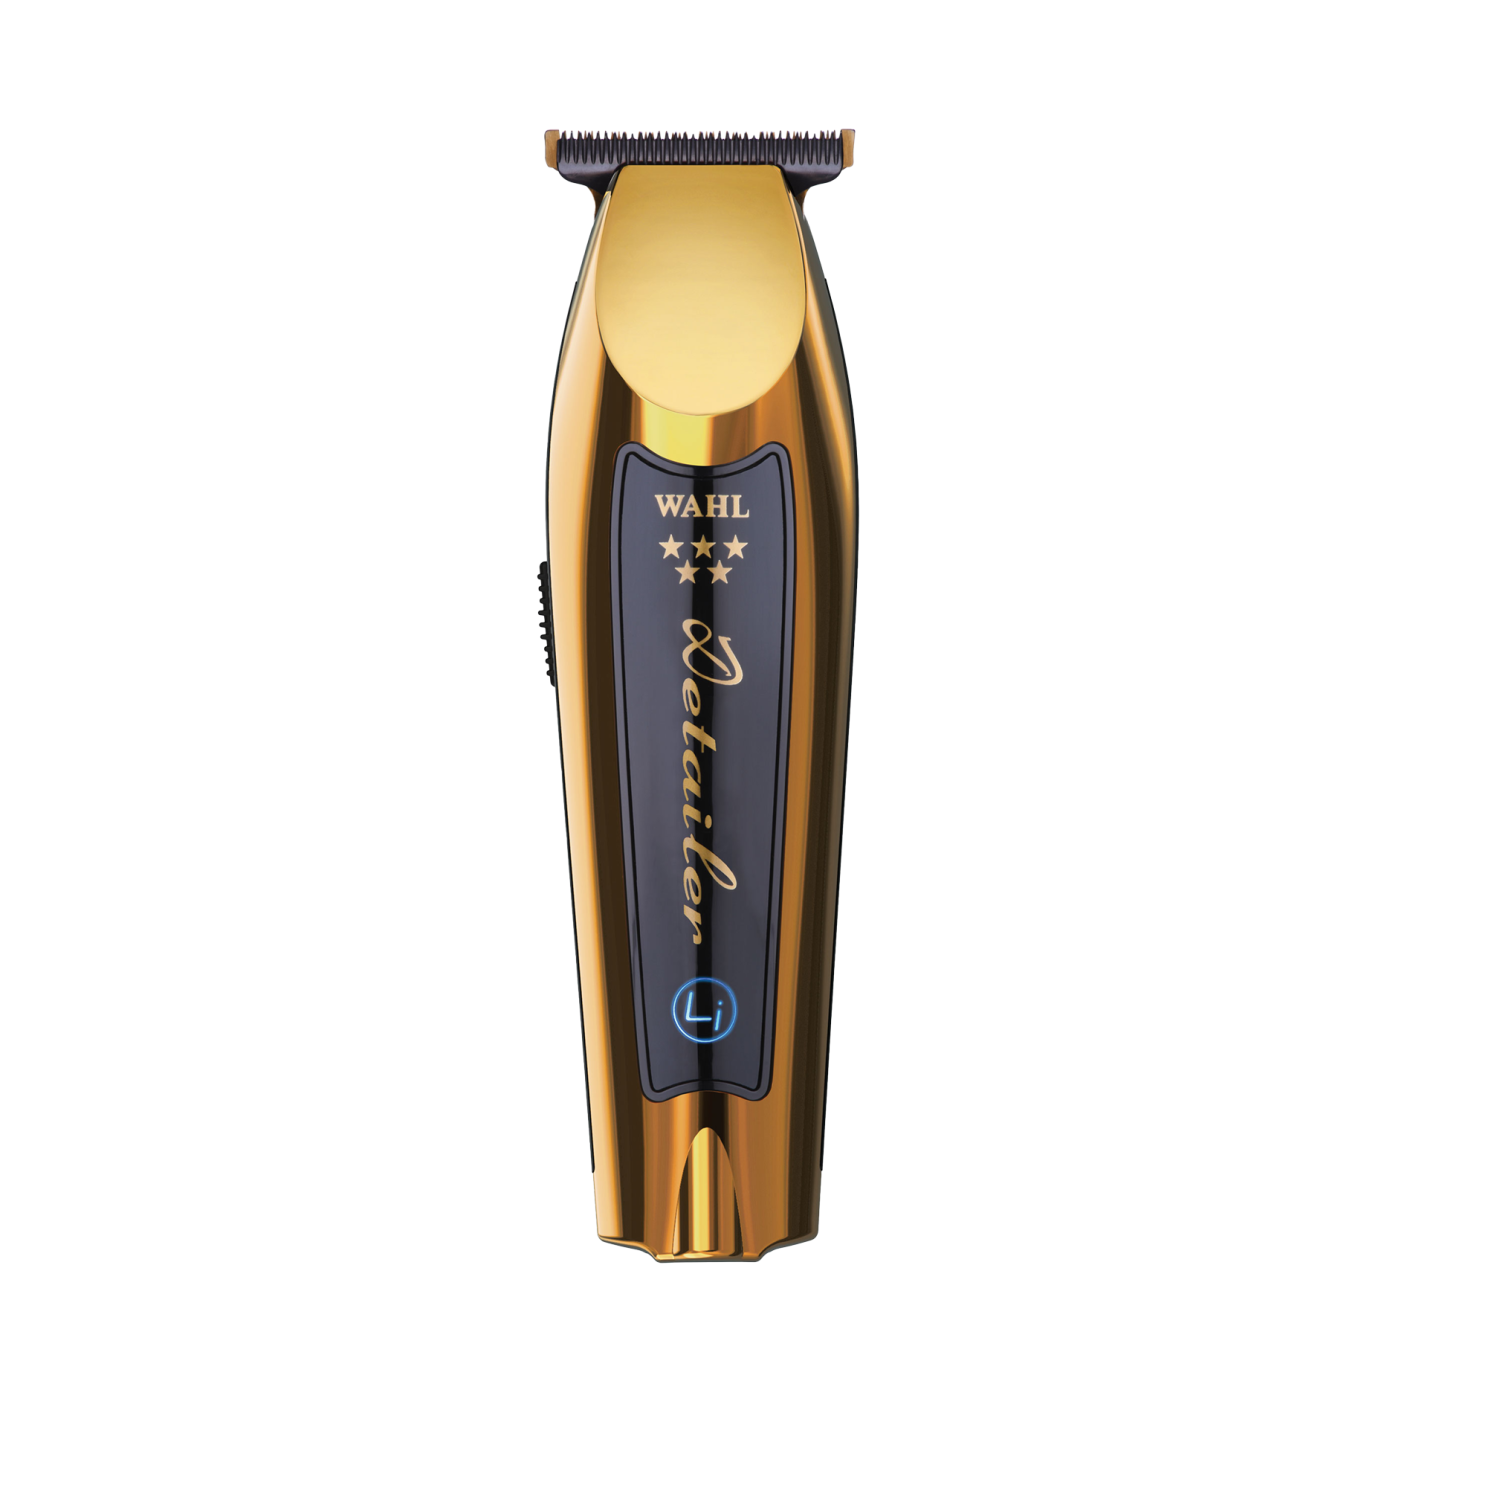 WAHL 5 Star Detailer Li Gold razor (with or without wires)